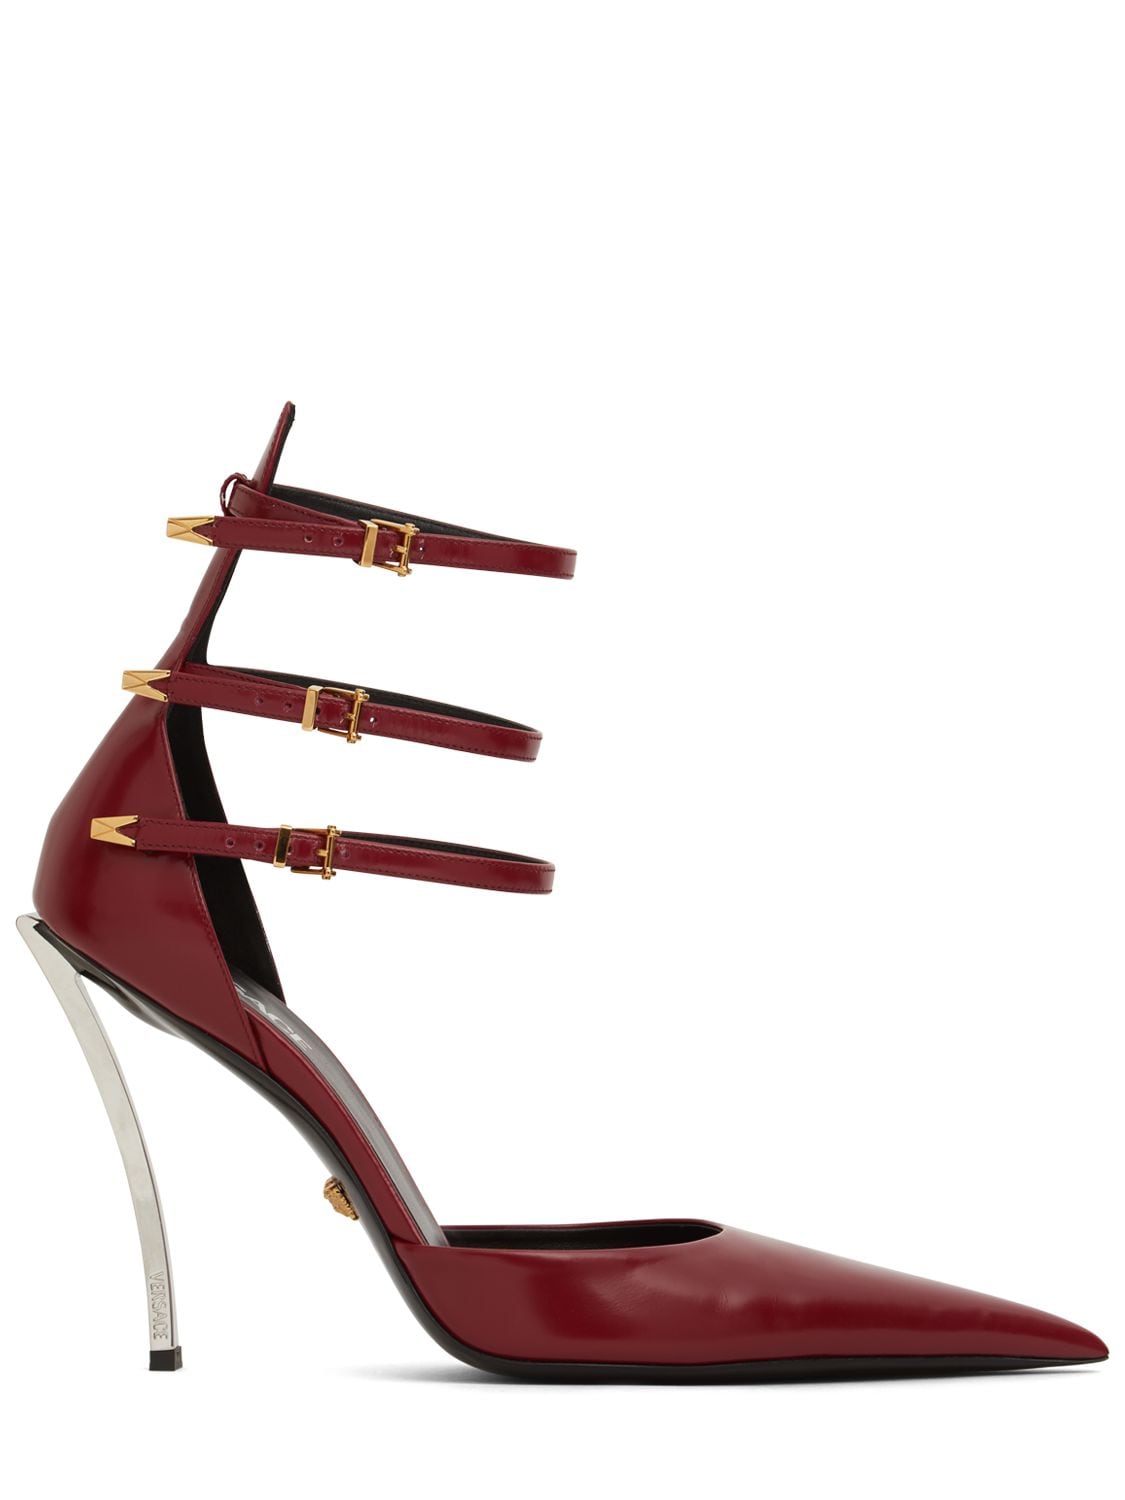 VERSACE 110mm Pointed Leather Pumps